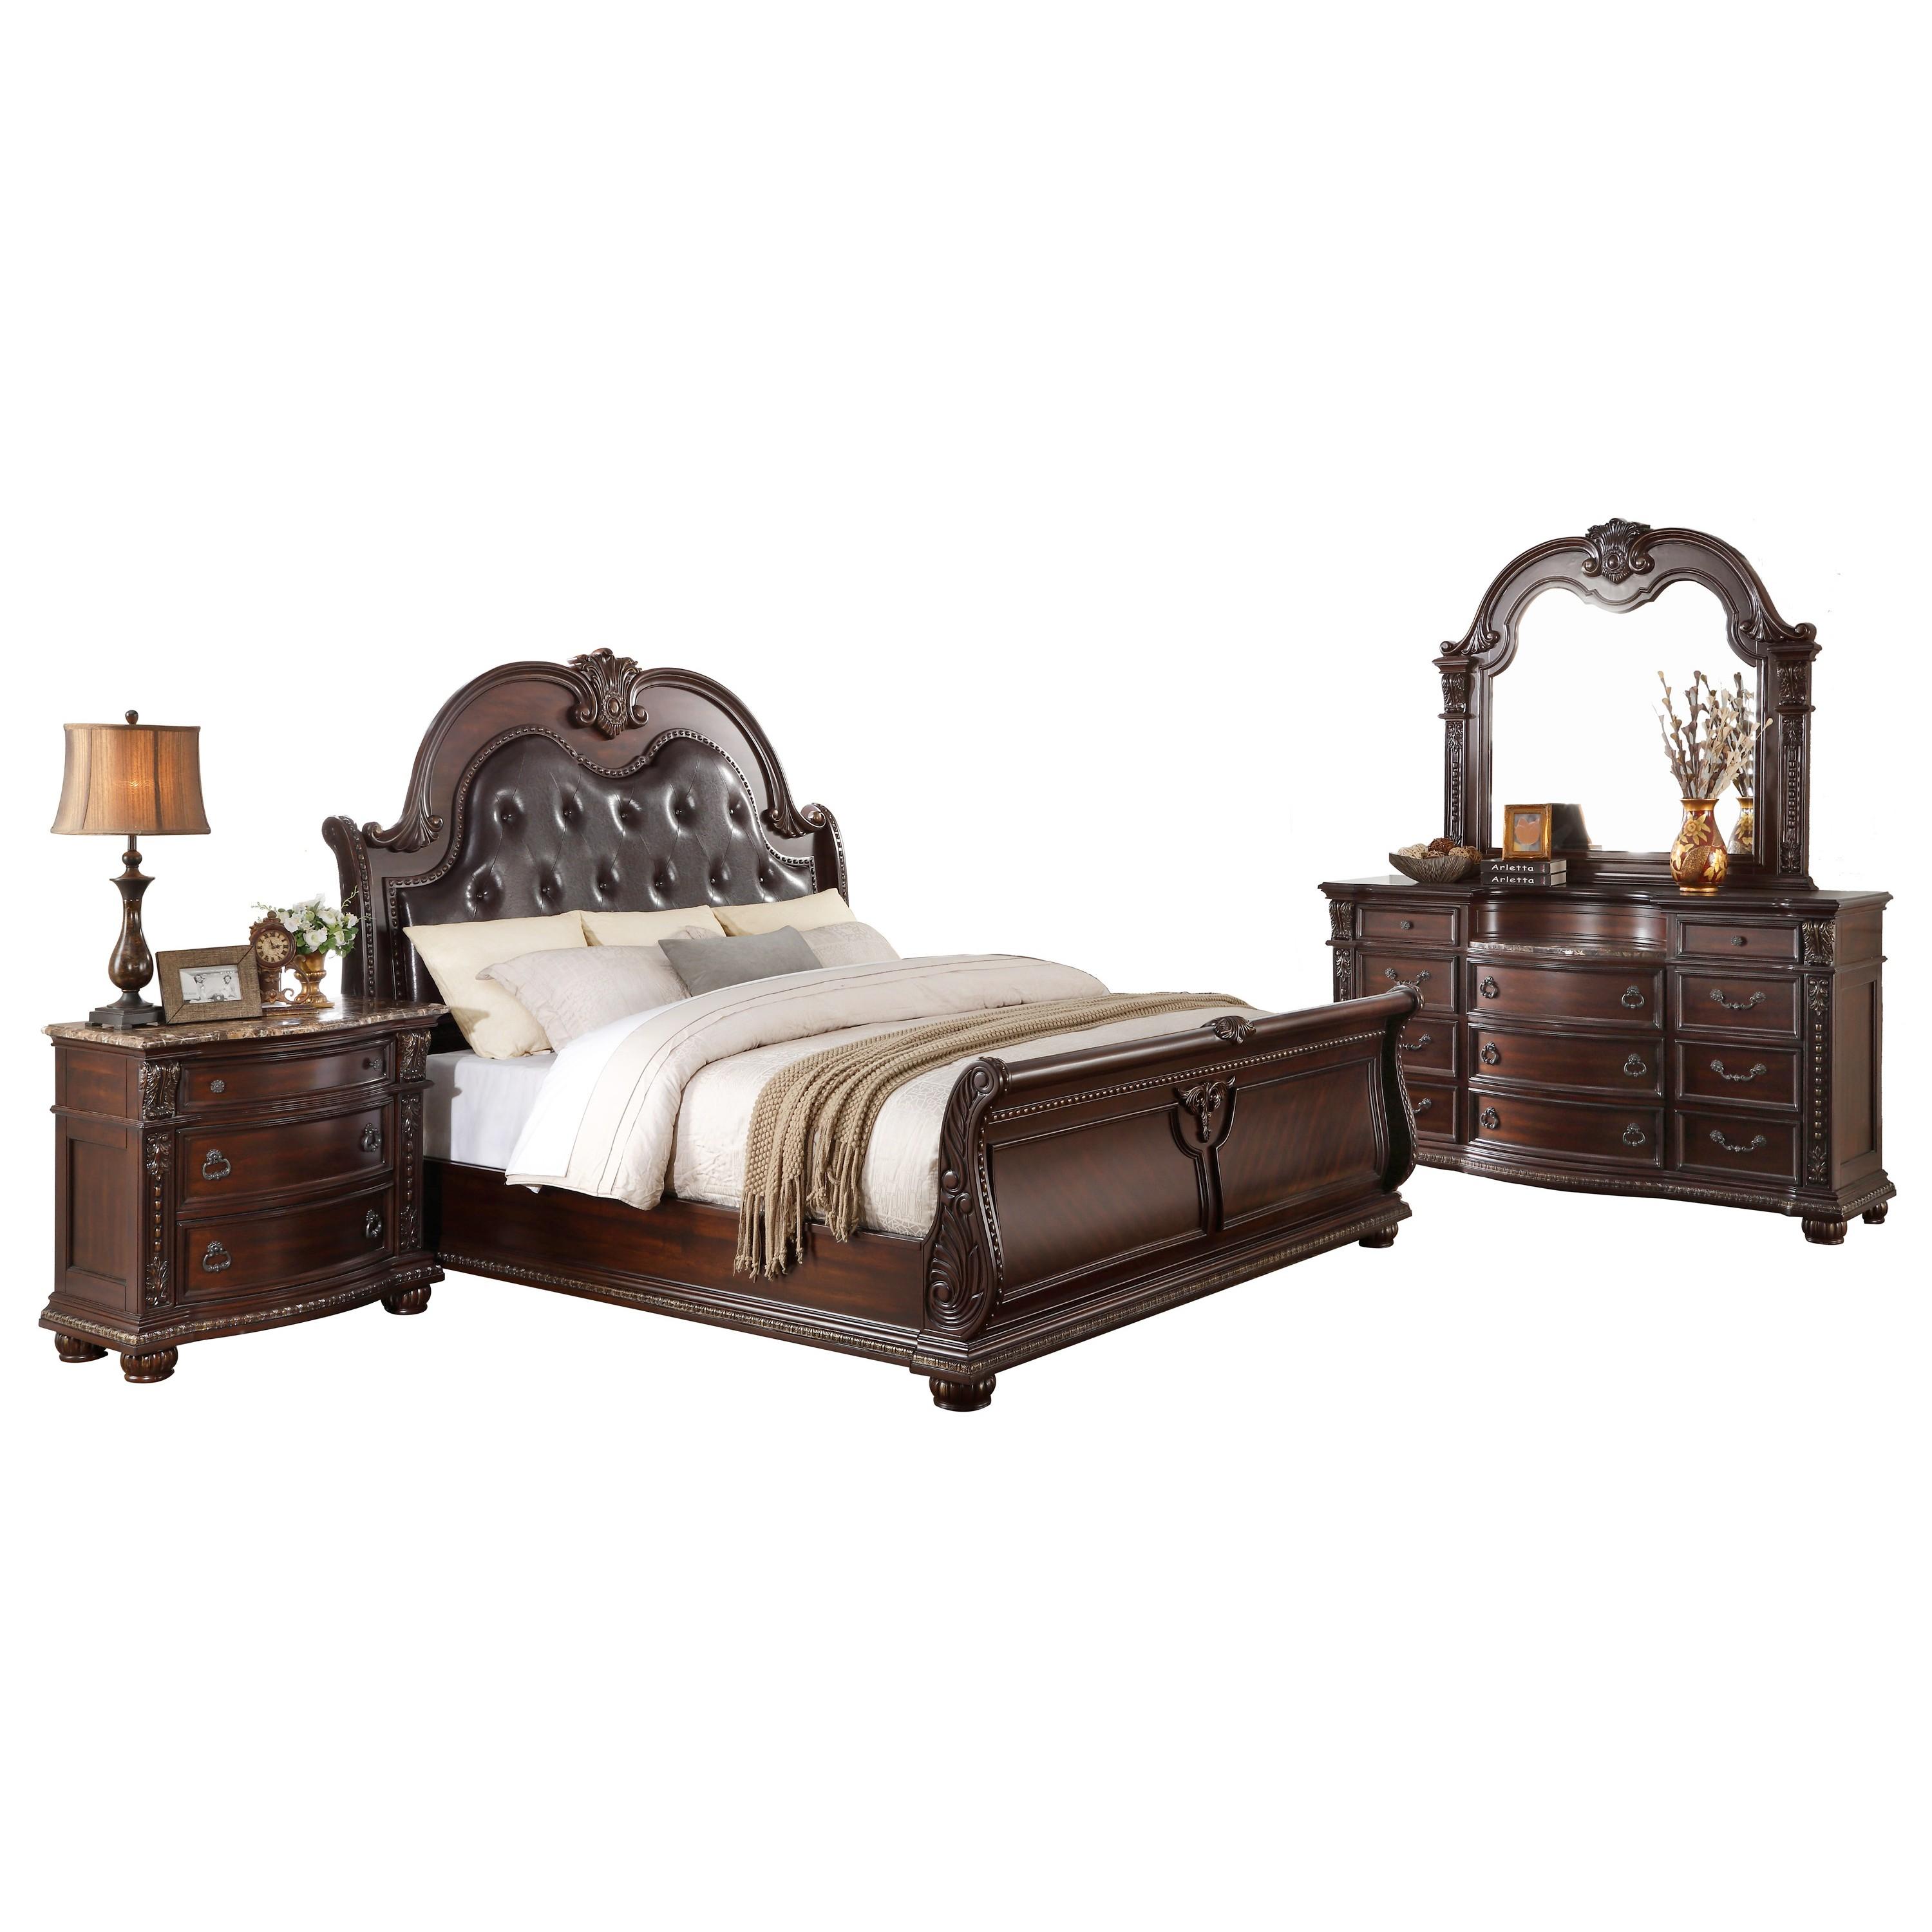 Classic Bedroom Set 1757-1-5PC Cavalier 1757-1-5PC in Dark Cherry Faux Leather